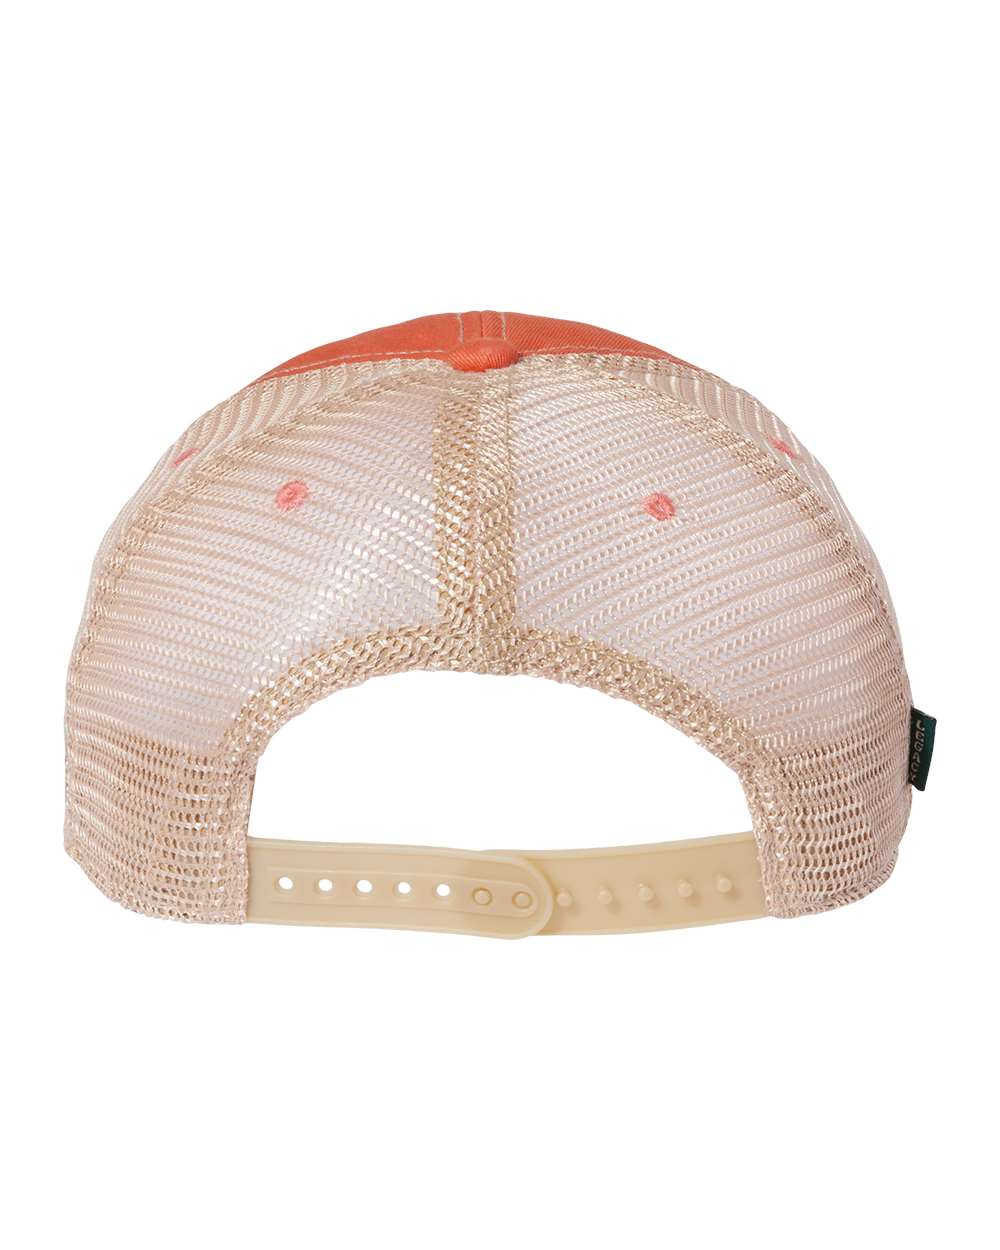 Back view of LEGACY OFA custom hat in coral and khaki